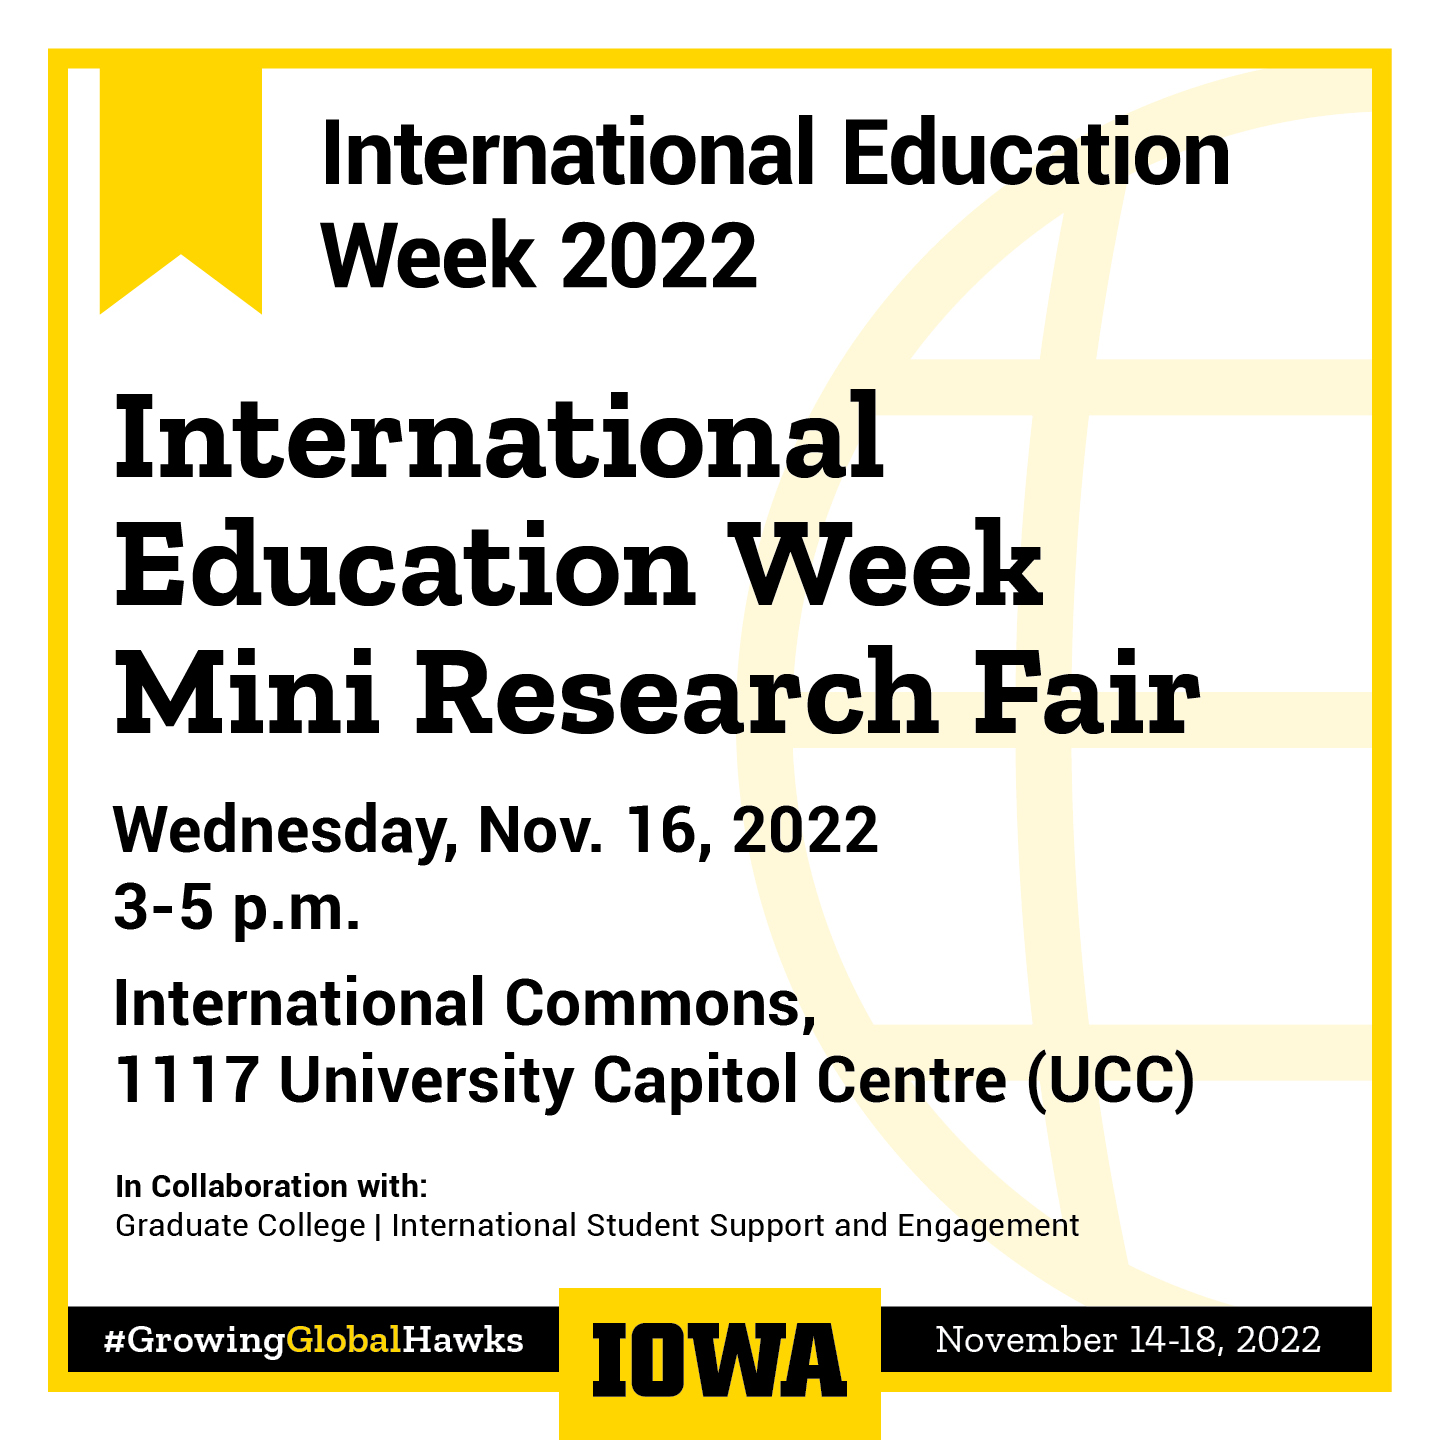 White square with yellow frame. Black text inside frame says "International Education Week Mini Research Fair. Wednesday, Nov. 16, 2022 3 - 5 PM International Commons, 1117 University Capitol Centre (UCC)